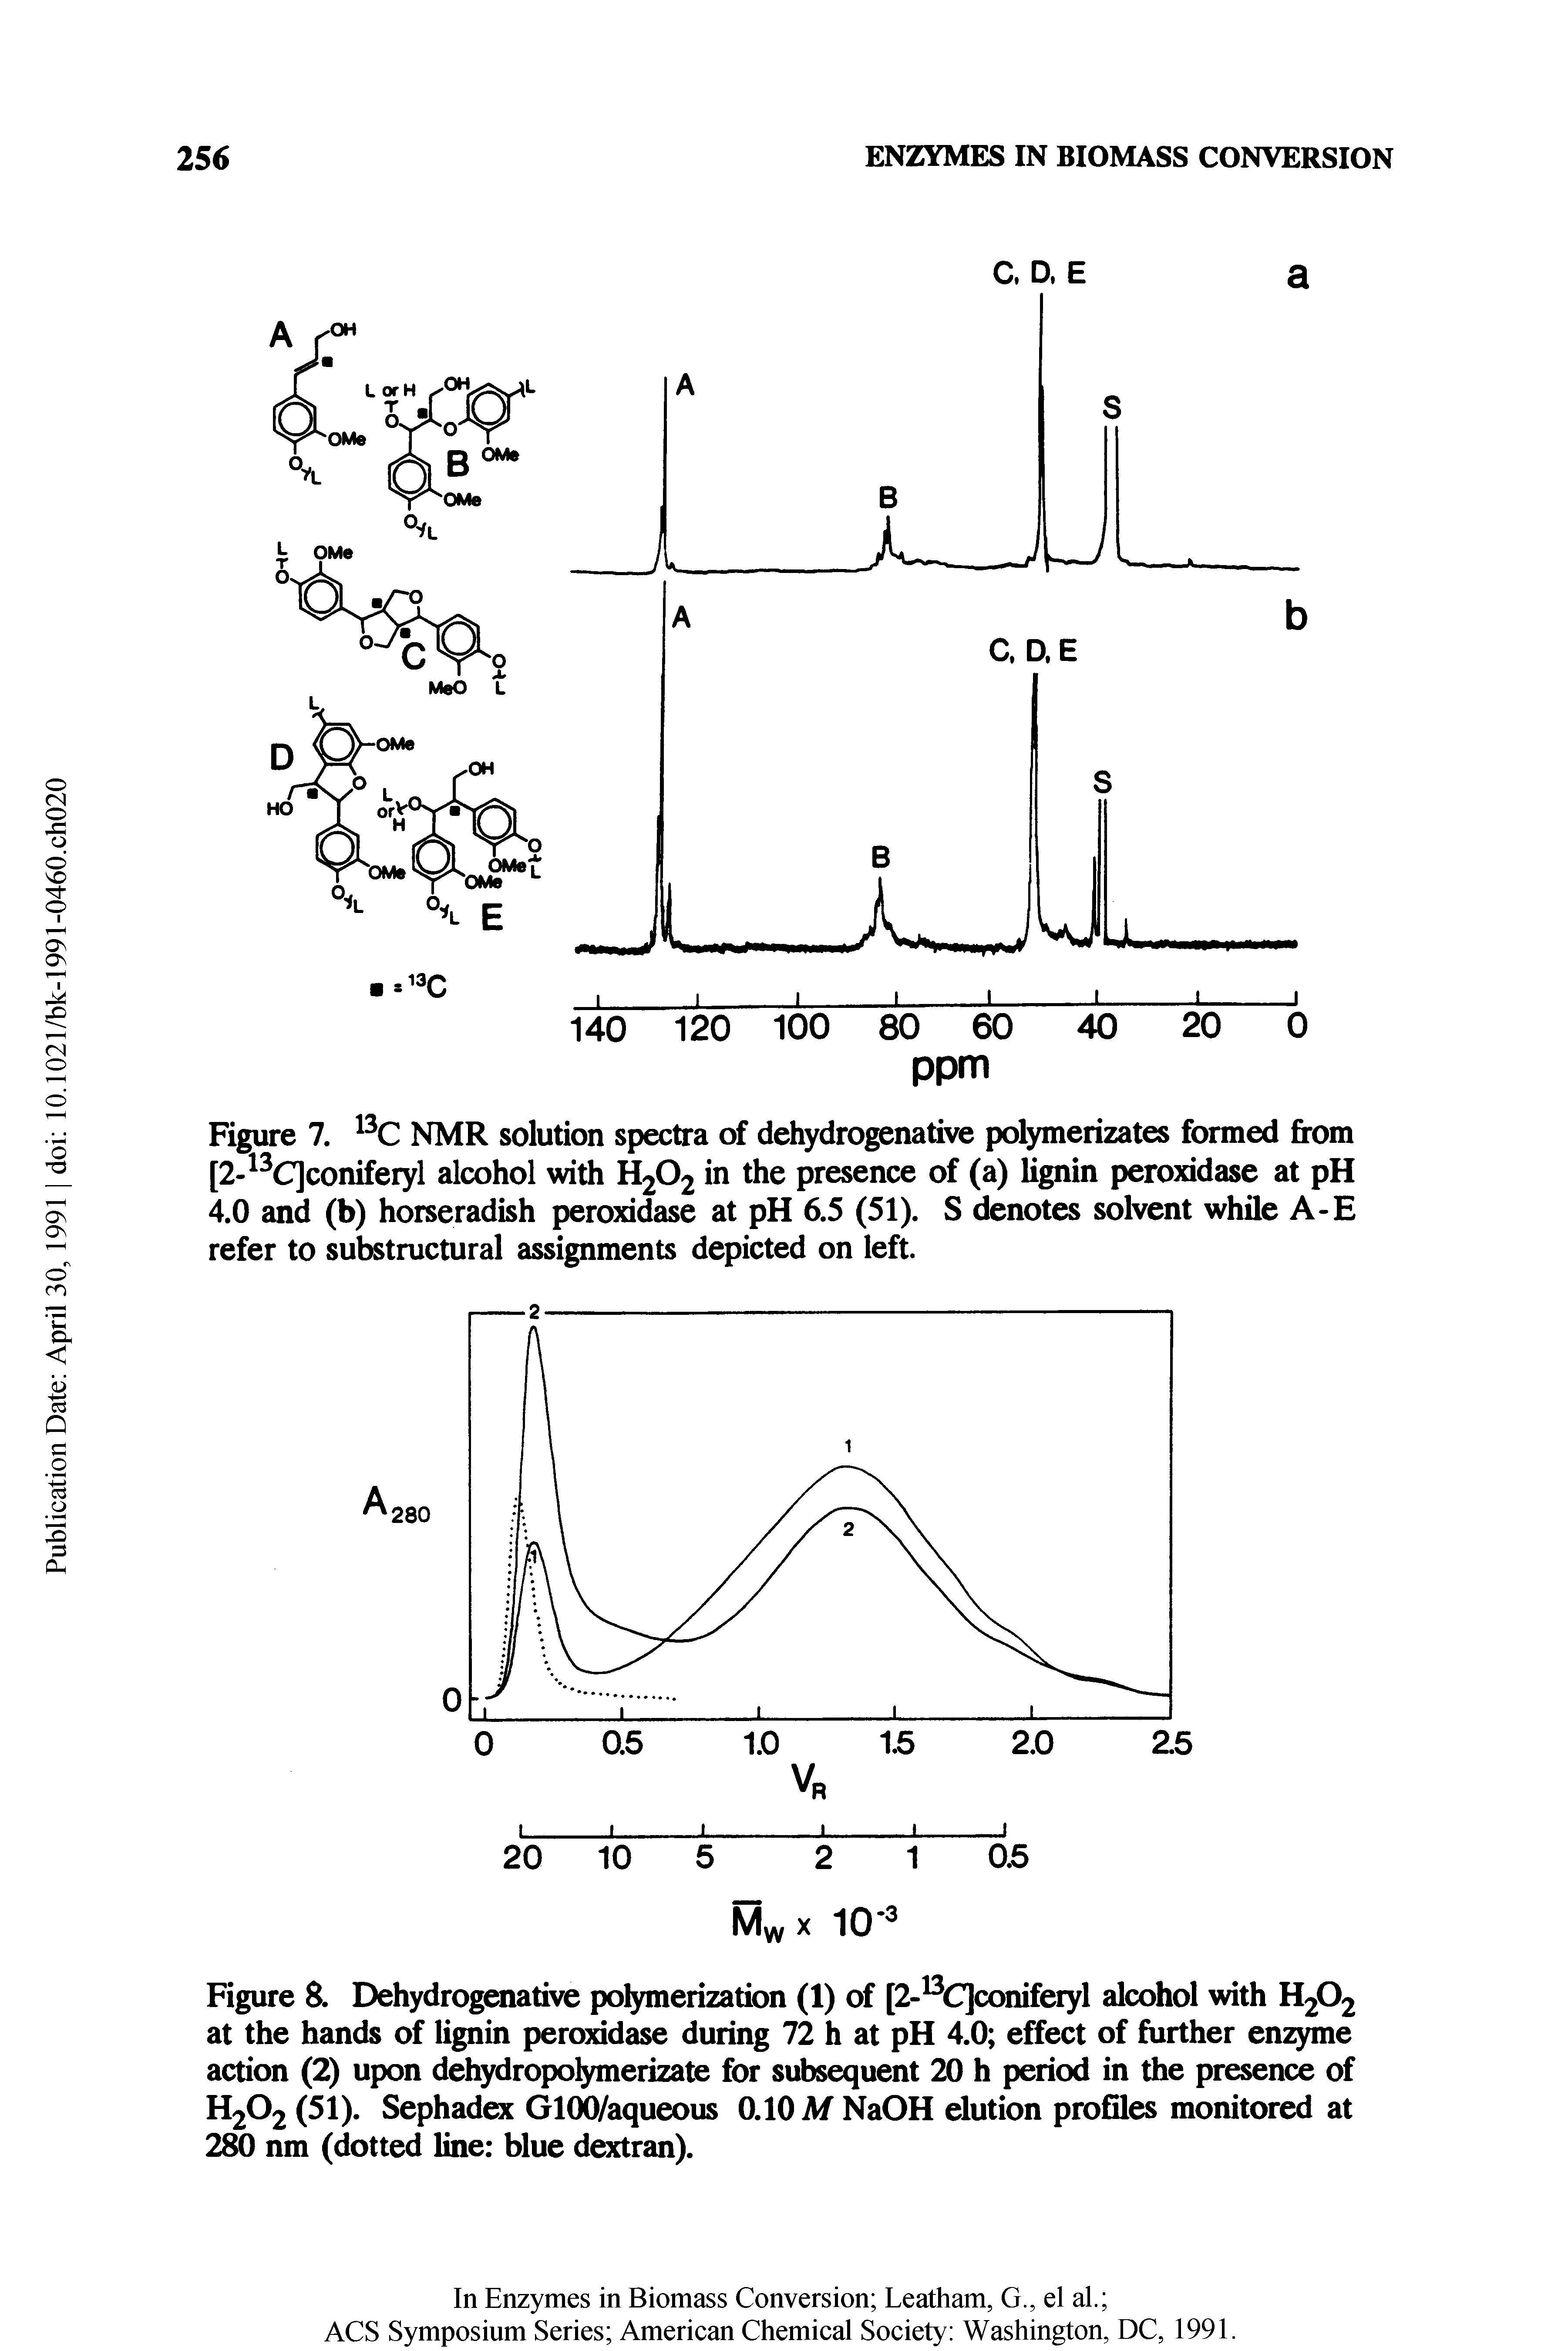 Figure 7. NMR solution spectra of dehydrogenative polymerizates formed from [2- C]coniferyl alcohol with H2O2 in the presence of (a) lignin peroxidase at pH 4.0 and (b) horseradish peroxidase at pH 6.5 (51). S denotes solvent while A-E refer to substructural assignments depicted on left.